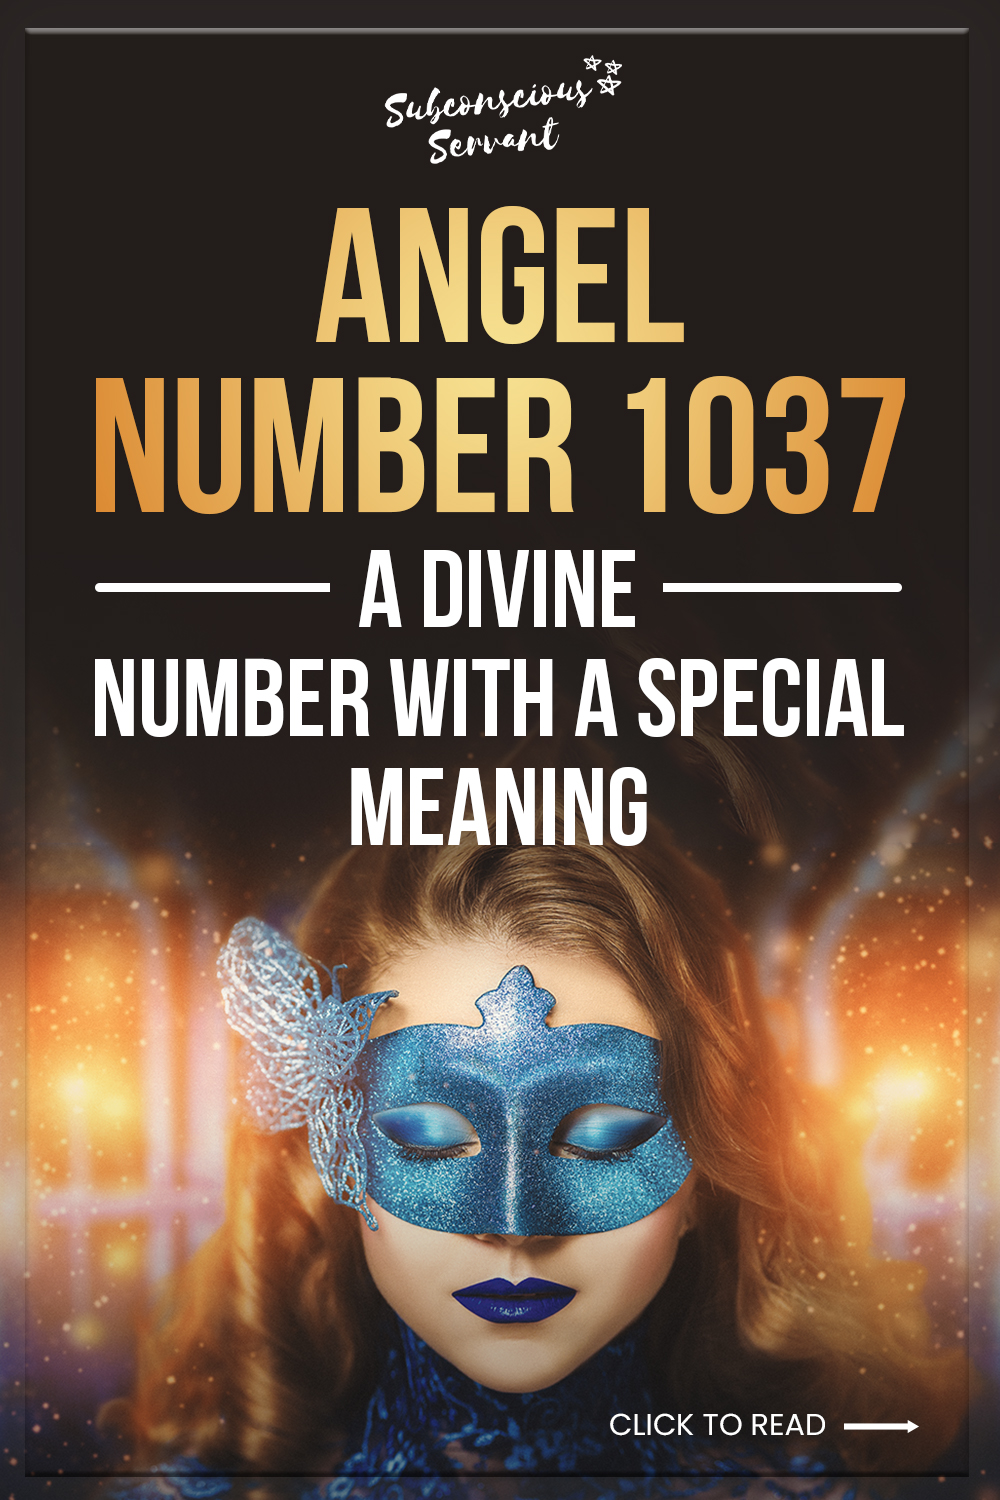 Angel Number 1037 Meaning: Spiritual Growth And Development